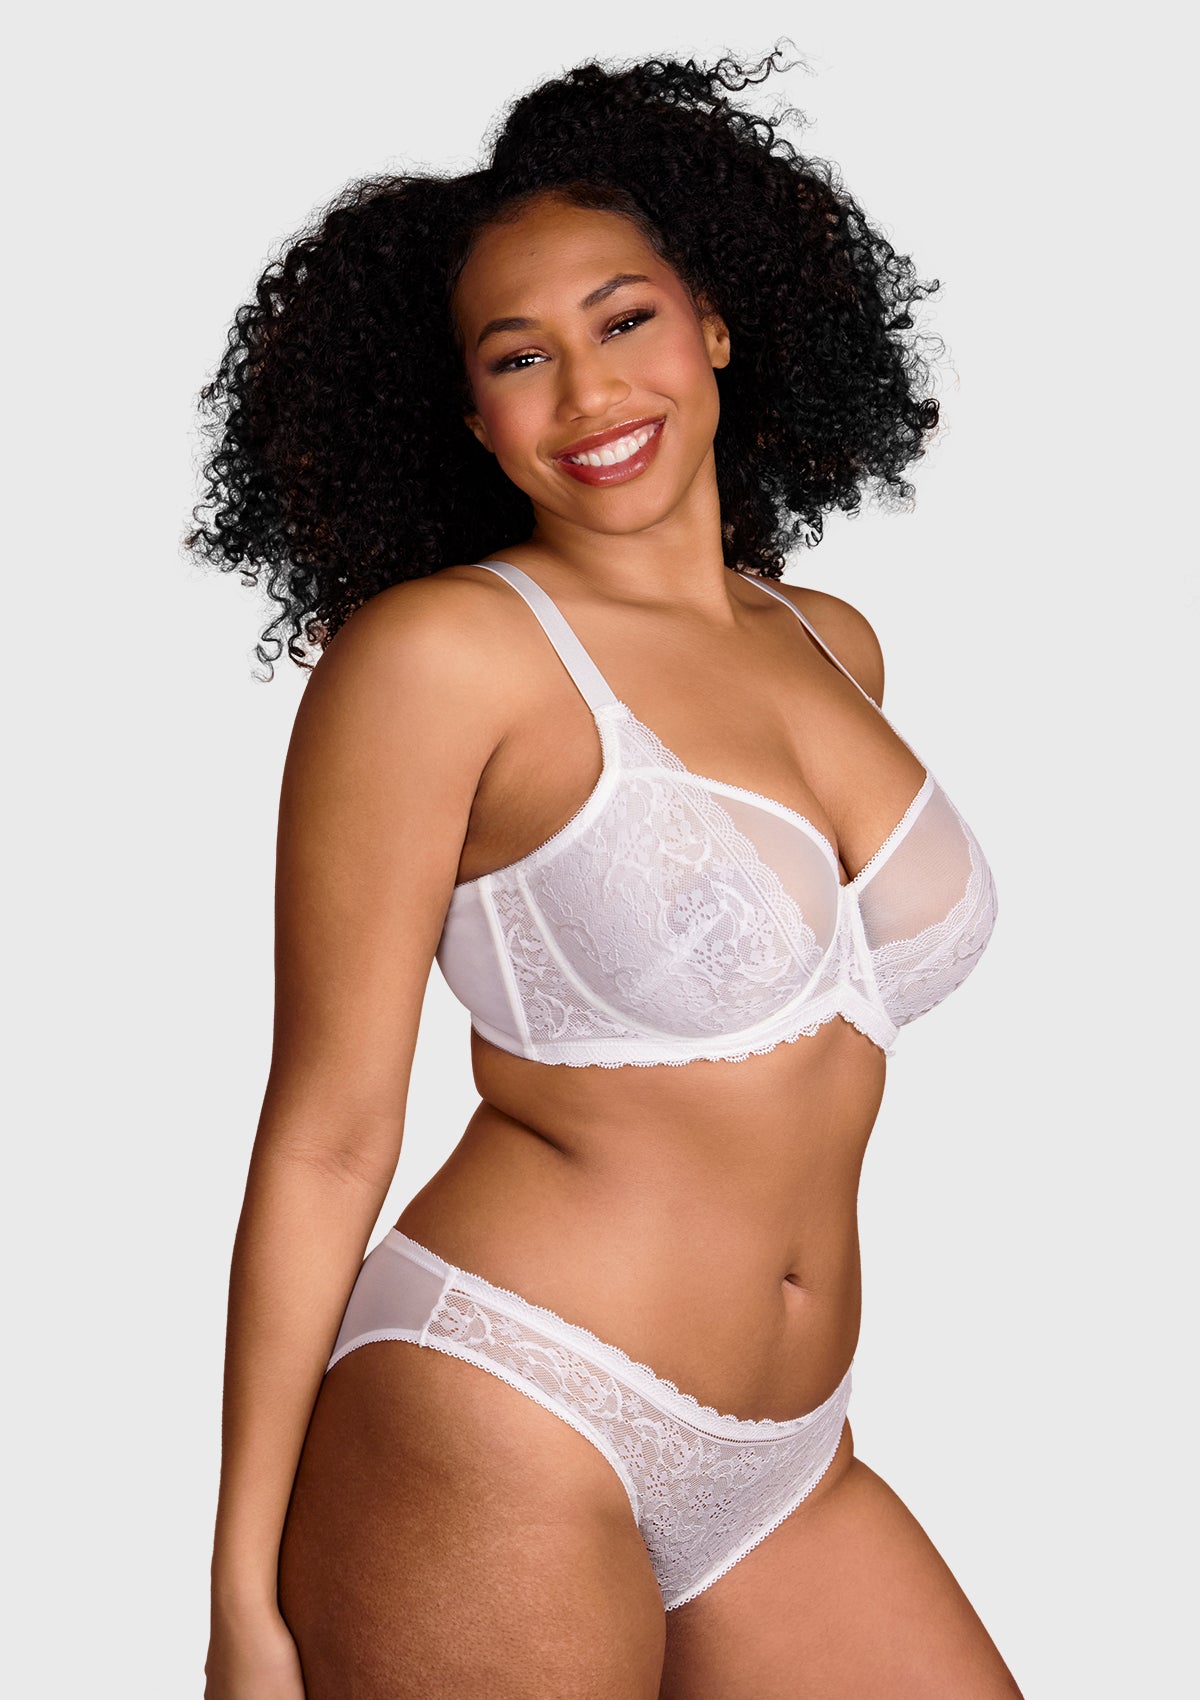 HSIA Anemone Big Bra: Best Bra For Lift And Support, Floral Bra - White / 36 / D